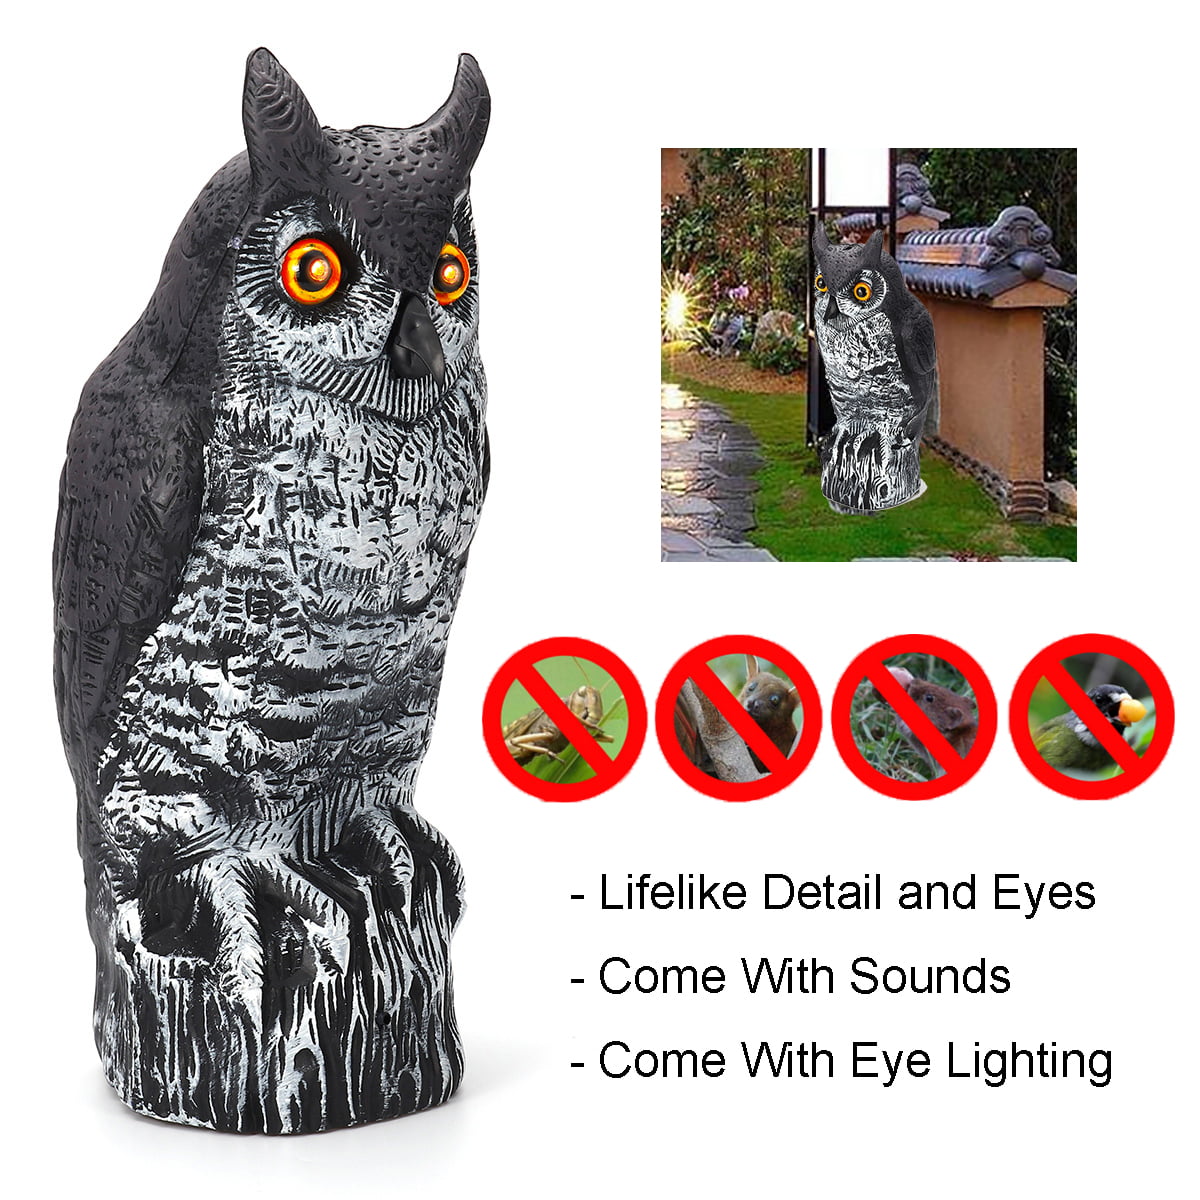 Lighted Black Owl  20 IN HIGH battery operated  new in box 